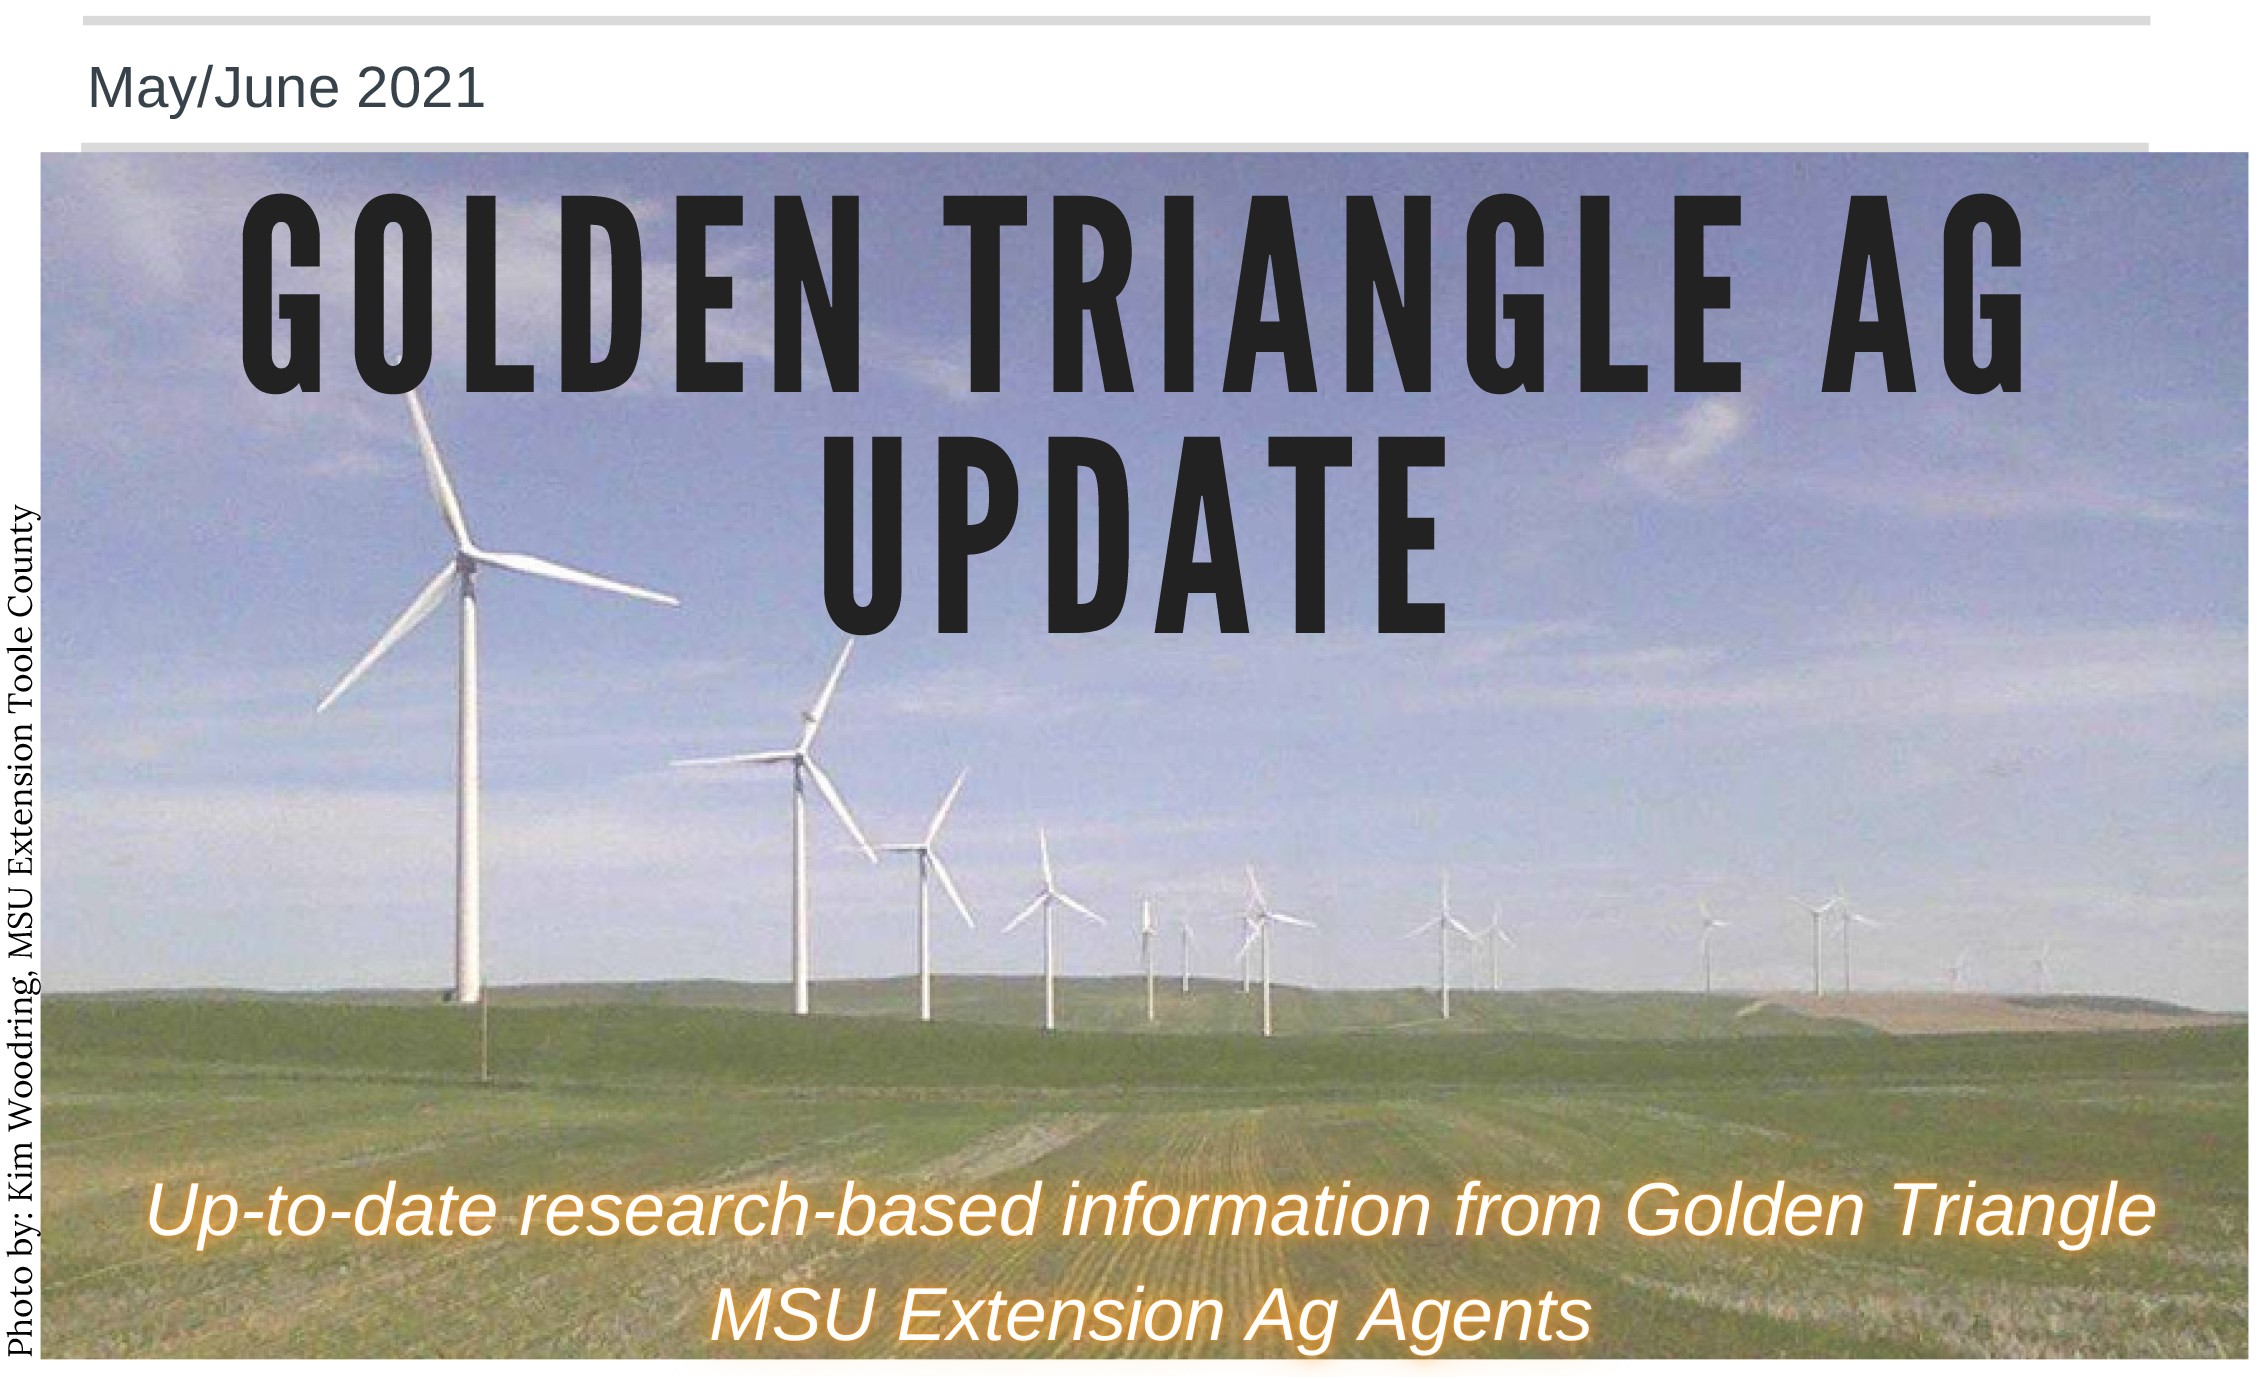 Golden Triangle Ag Update May-June 2021